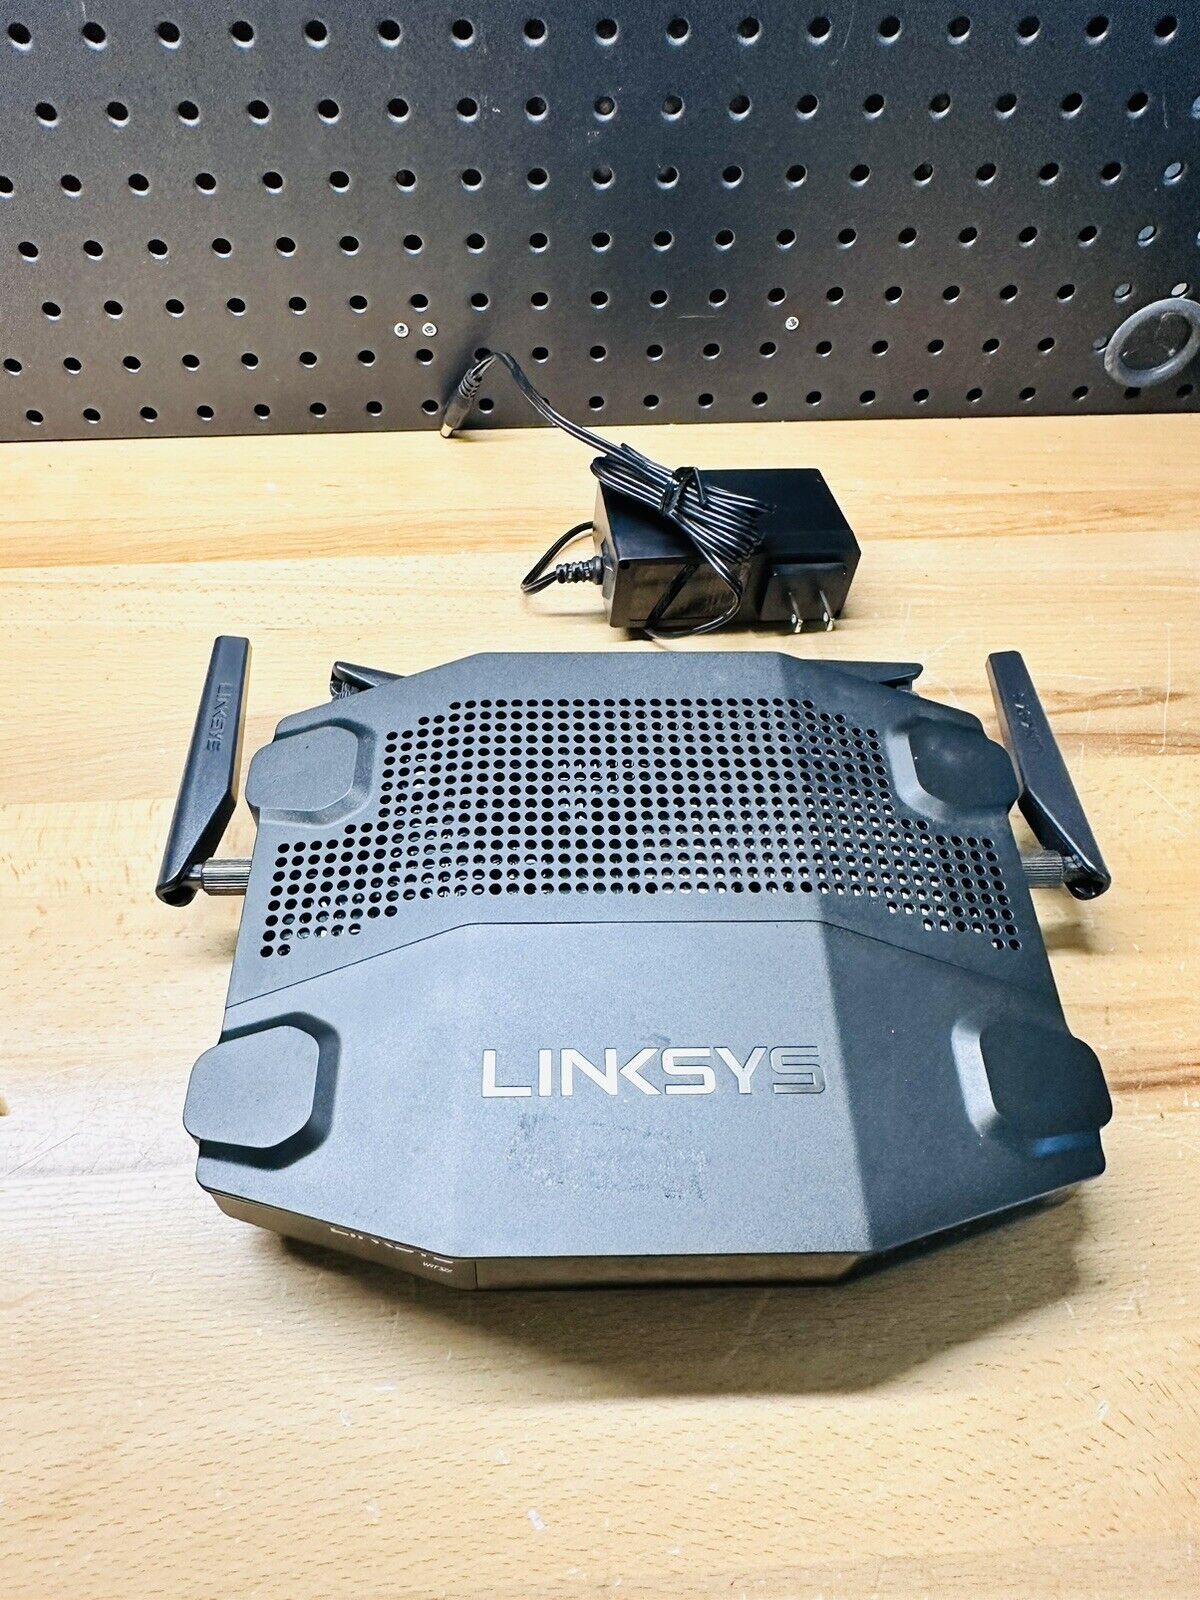 (R) Linksys WRT32X Router BLACK Wifi Router Bundle with Power Adapter